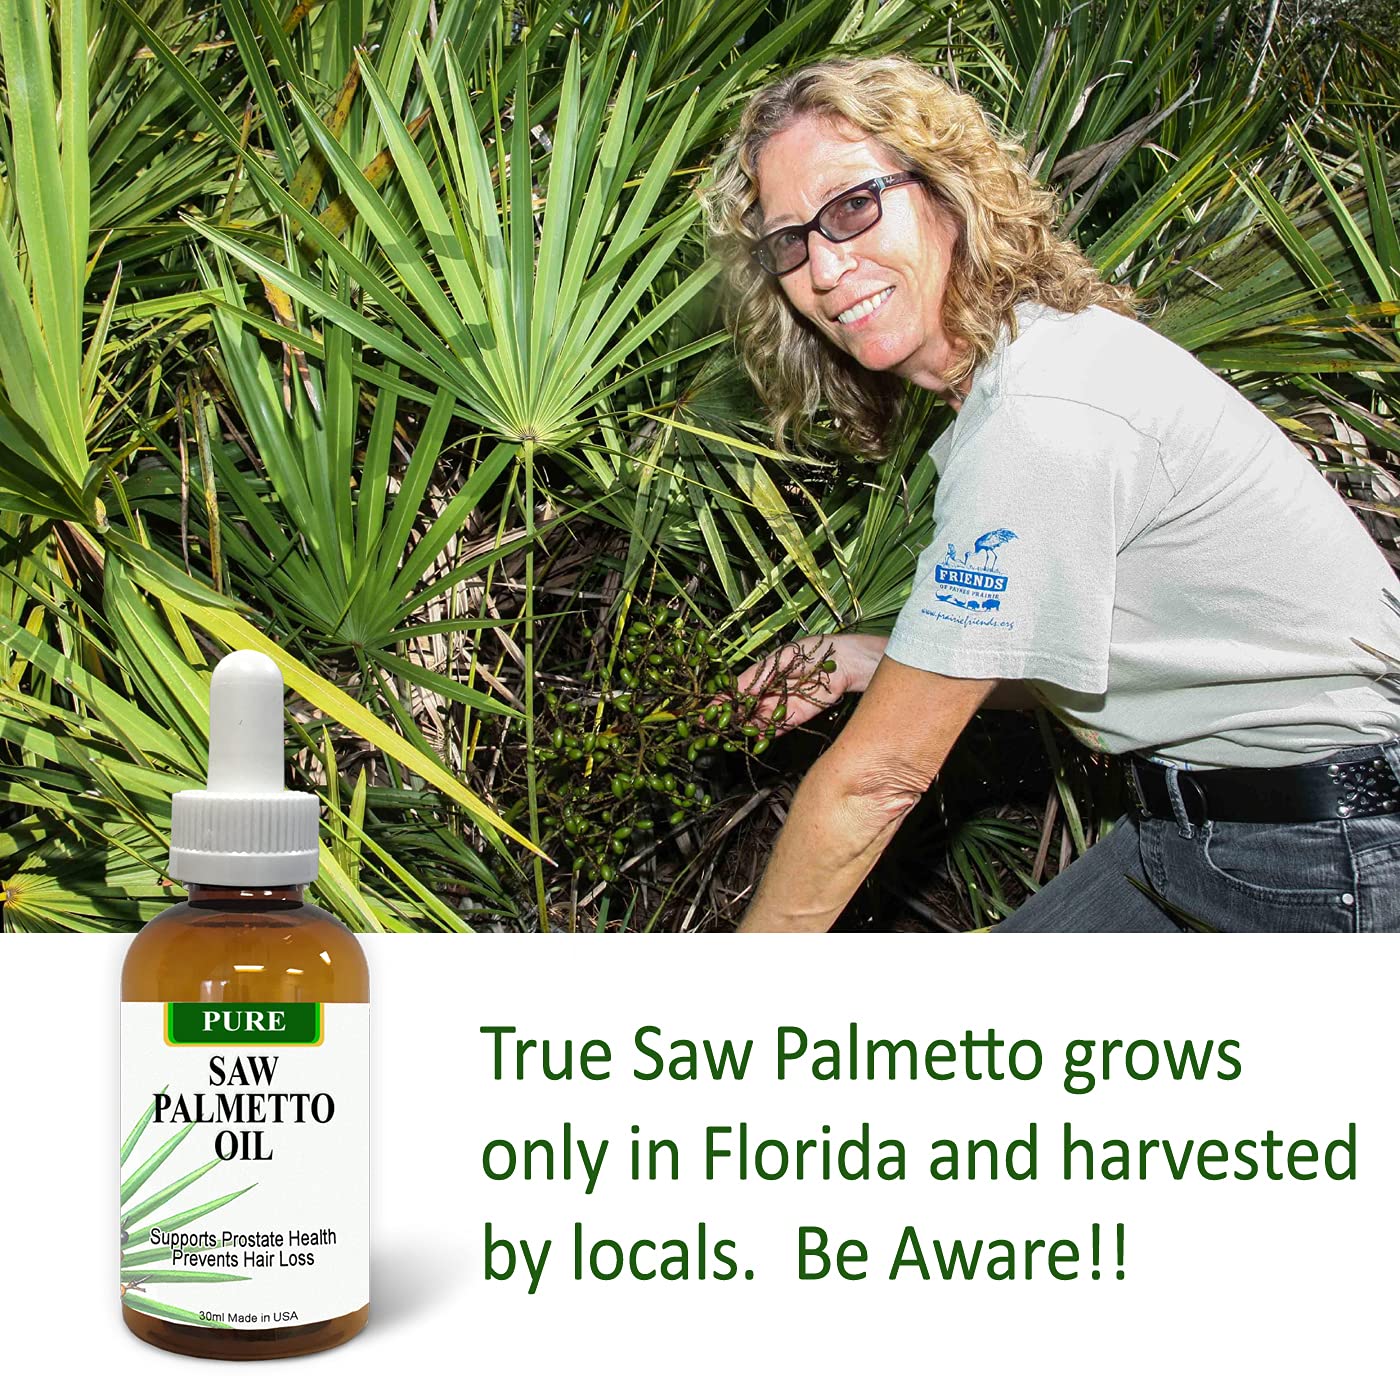 Pure Saw Palmetto Berries Oil 2x30ml Wild & Natural 60-90-day Supply Unlike Inefficient Powders, Supports Prostate Health Sleep better Reduce Frequent Urination DHT Blocker Help stop Hair Loss